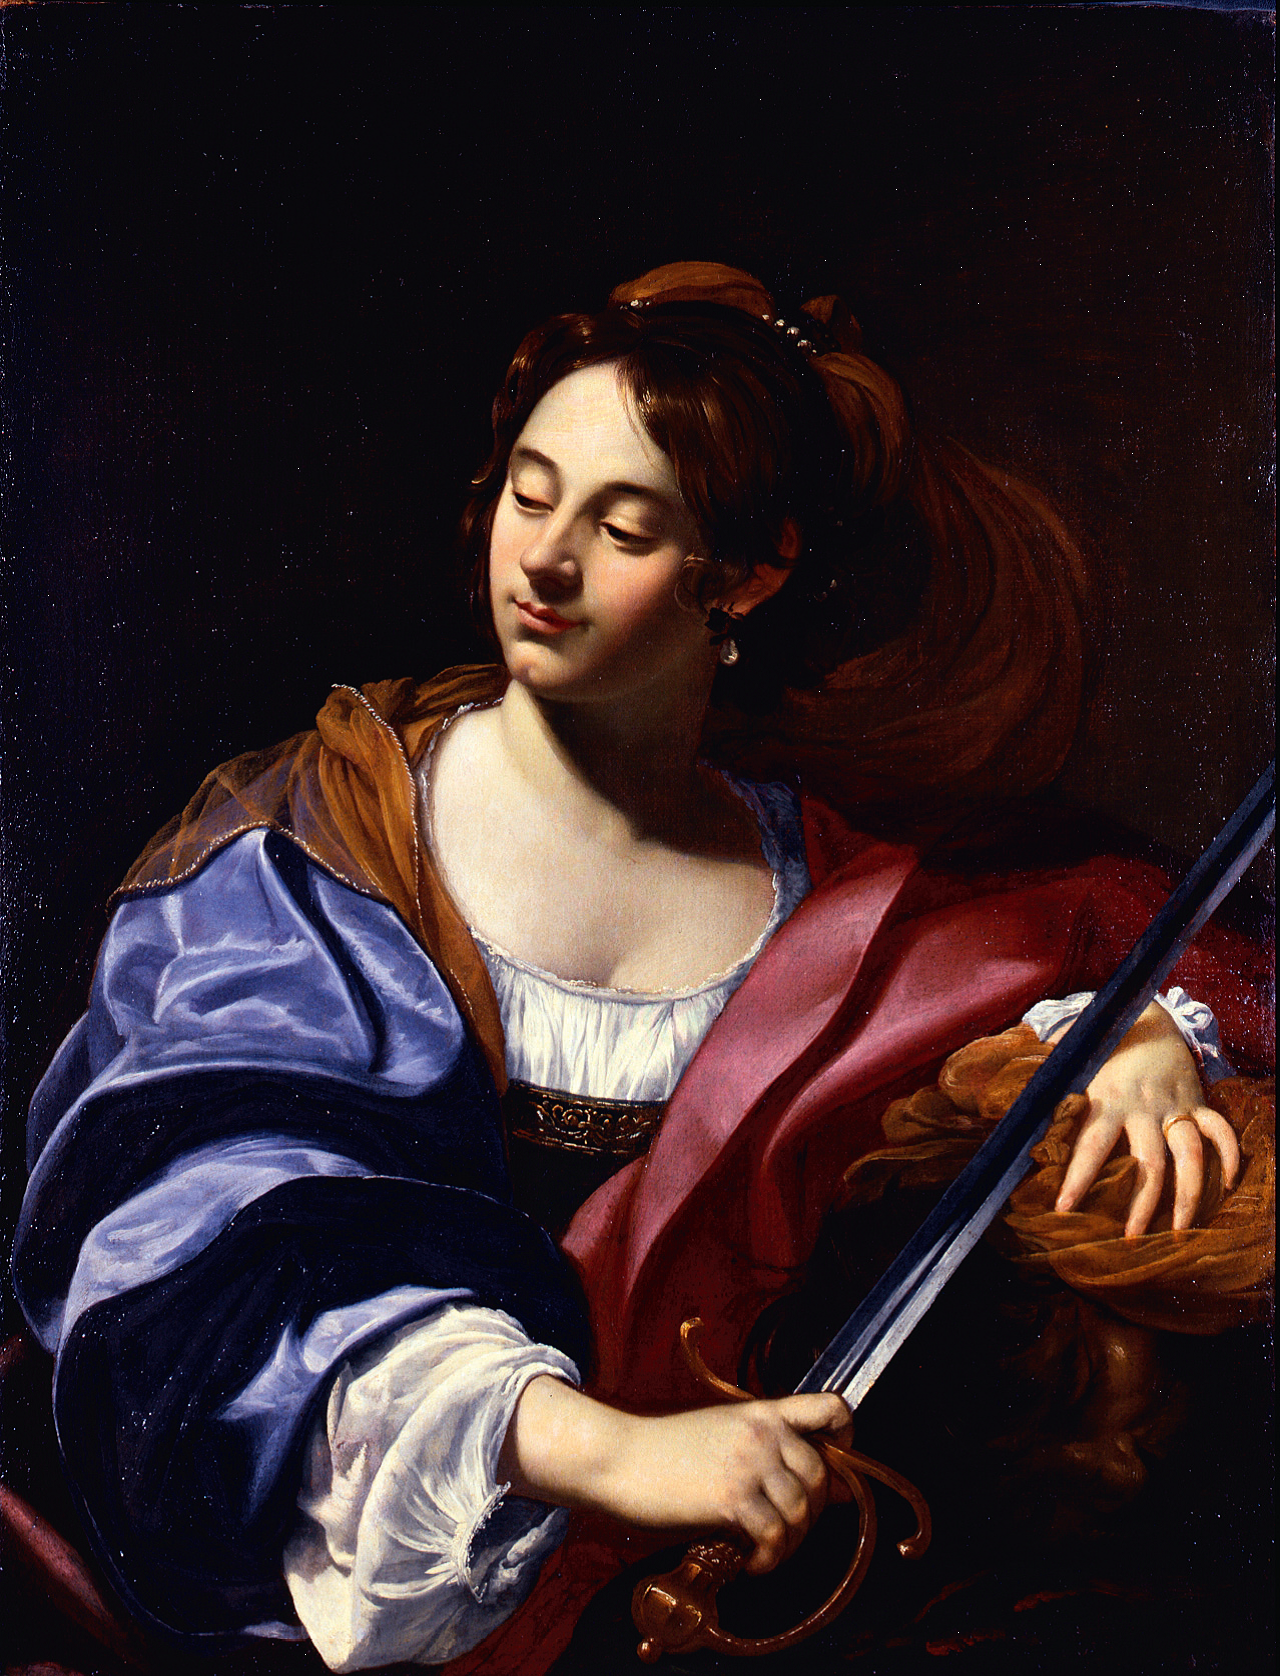 A half-length portrait of a young woman wearing an elaborate costume of satin white, blue, mauve, and orange. Her hair is tied back, and she wears earrings. She holds a sword in her right hand, crossed across her chest. She looks down and to the left of the canvas with a serene smile, seemingly unaware of the viewer.